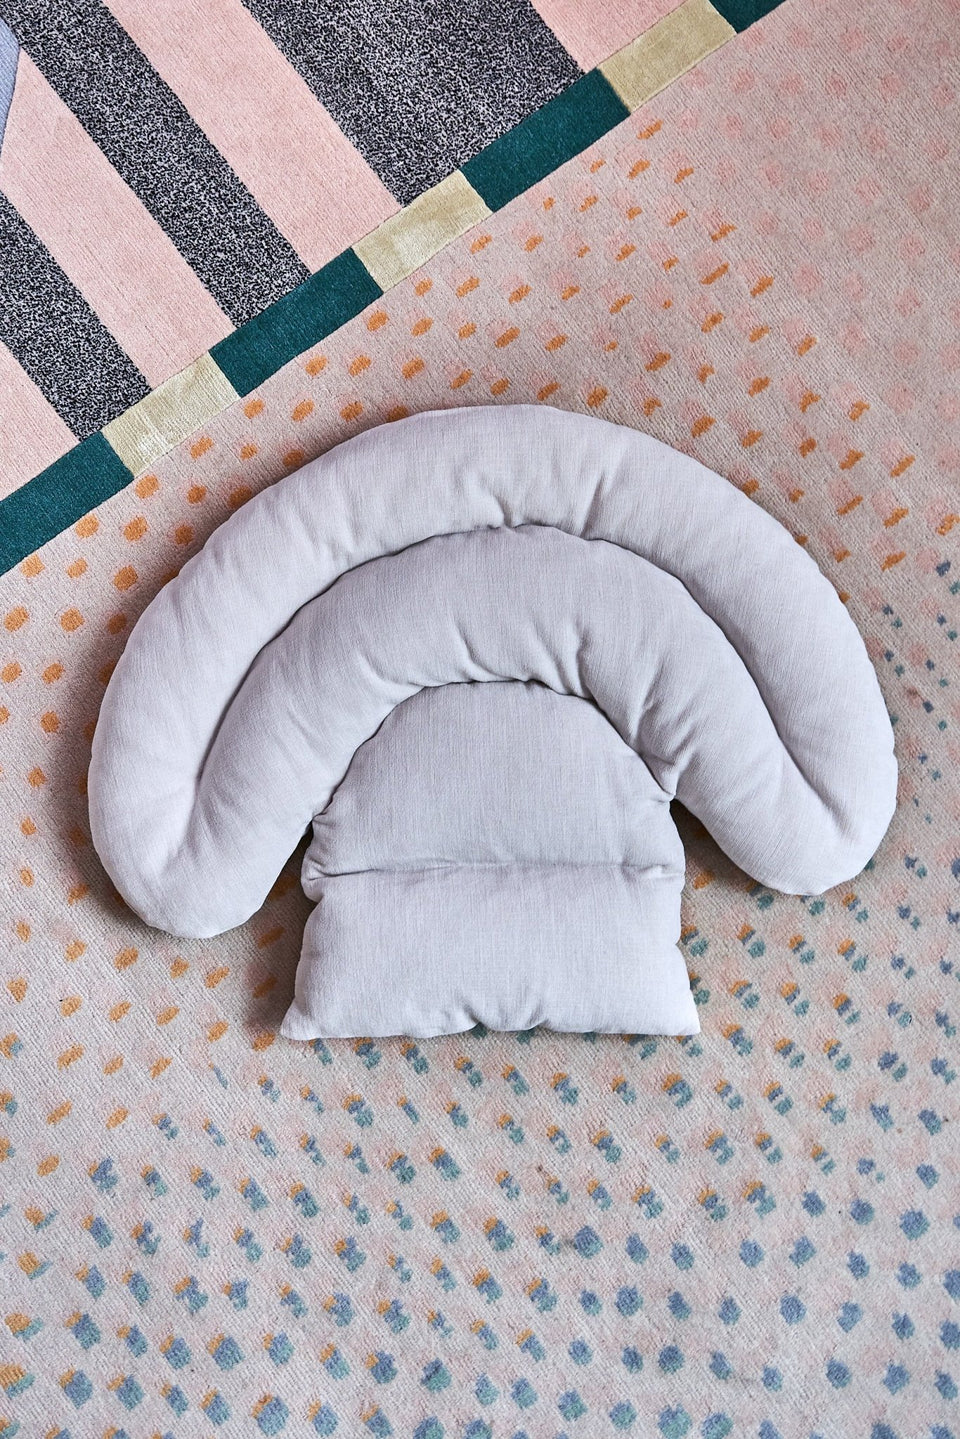 Roly Poly Cushion - Cowrie & Conch